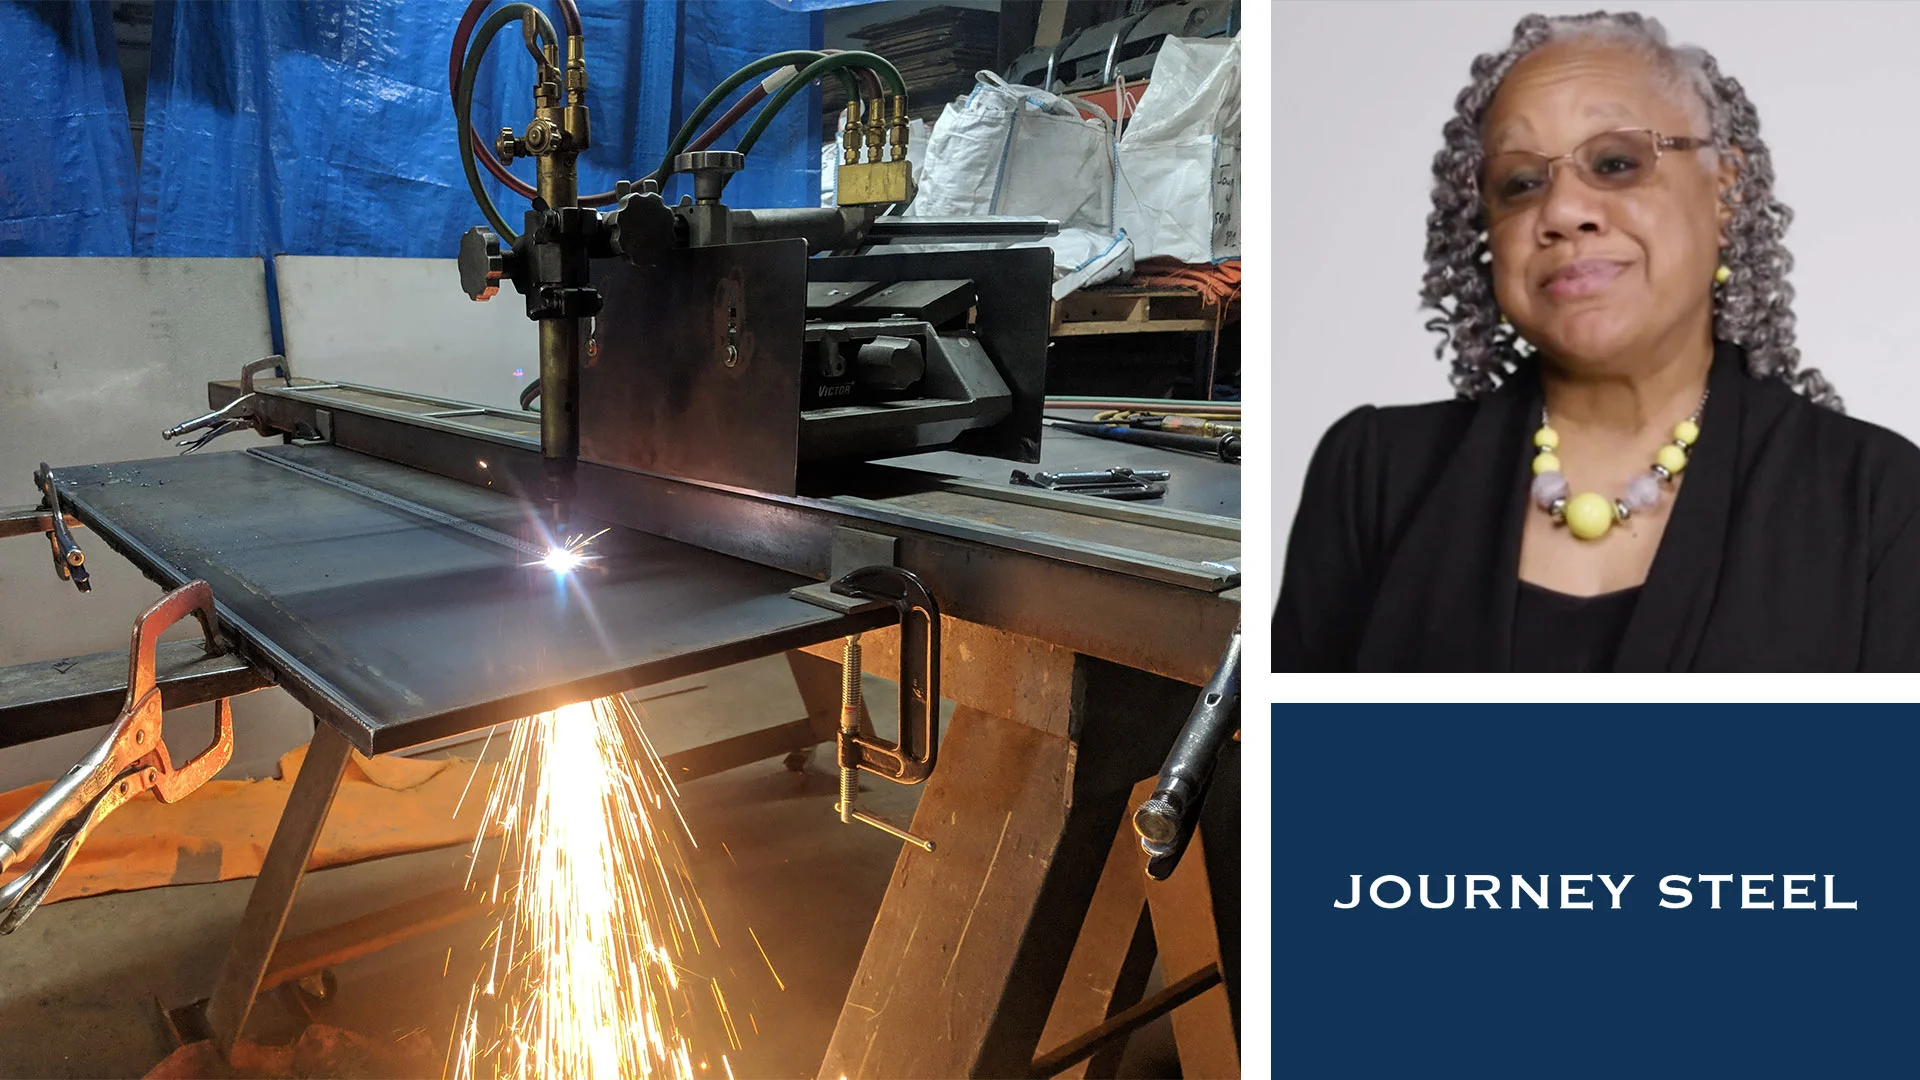 Journey Steel image, logo and business owner